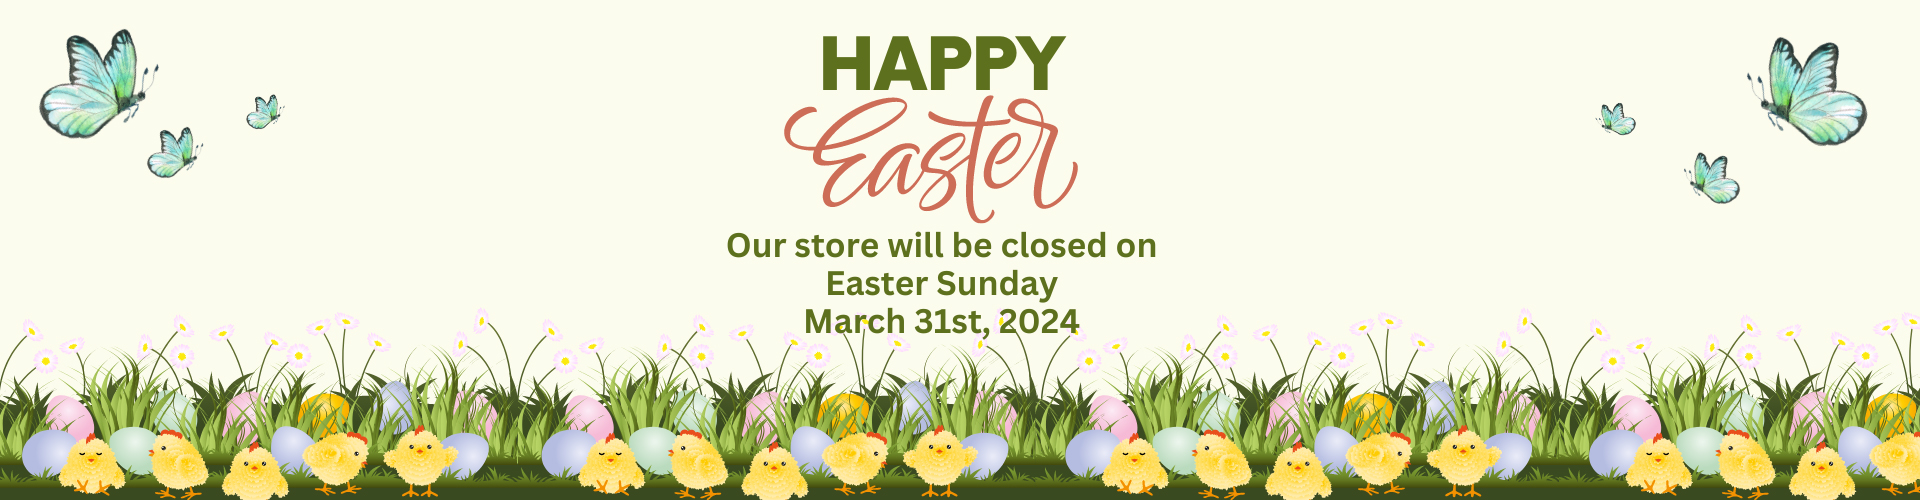 Easter-Store-Hours-Fairfax-Lumber-and-Hardware-webbanner